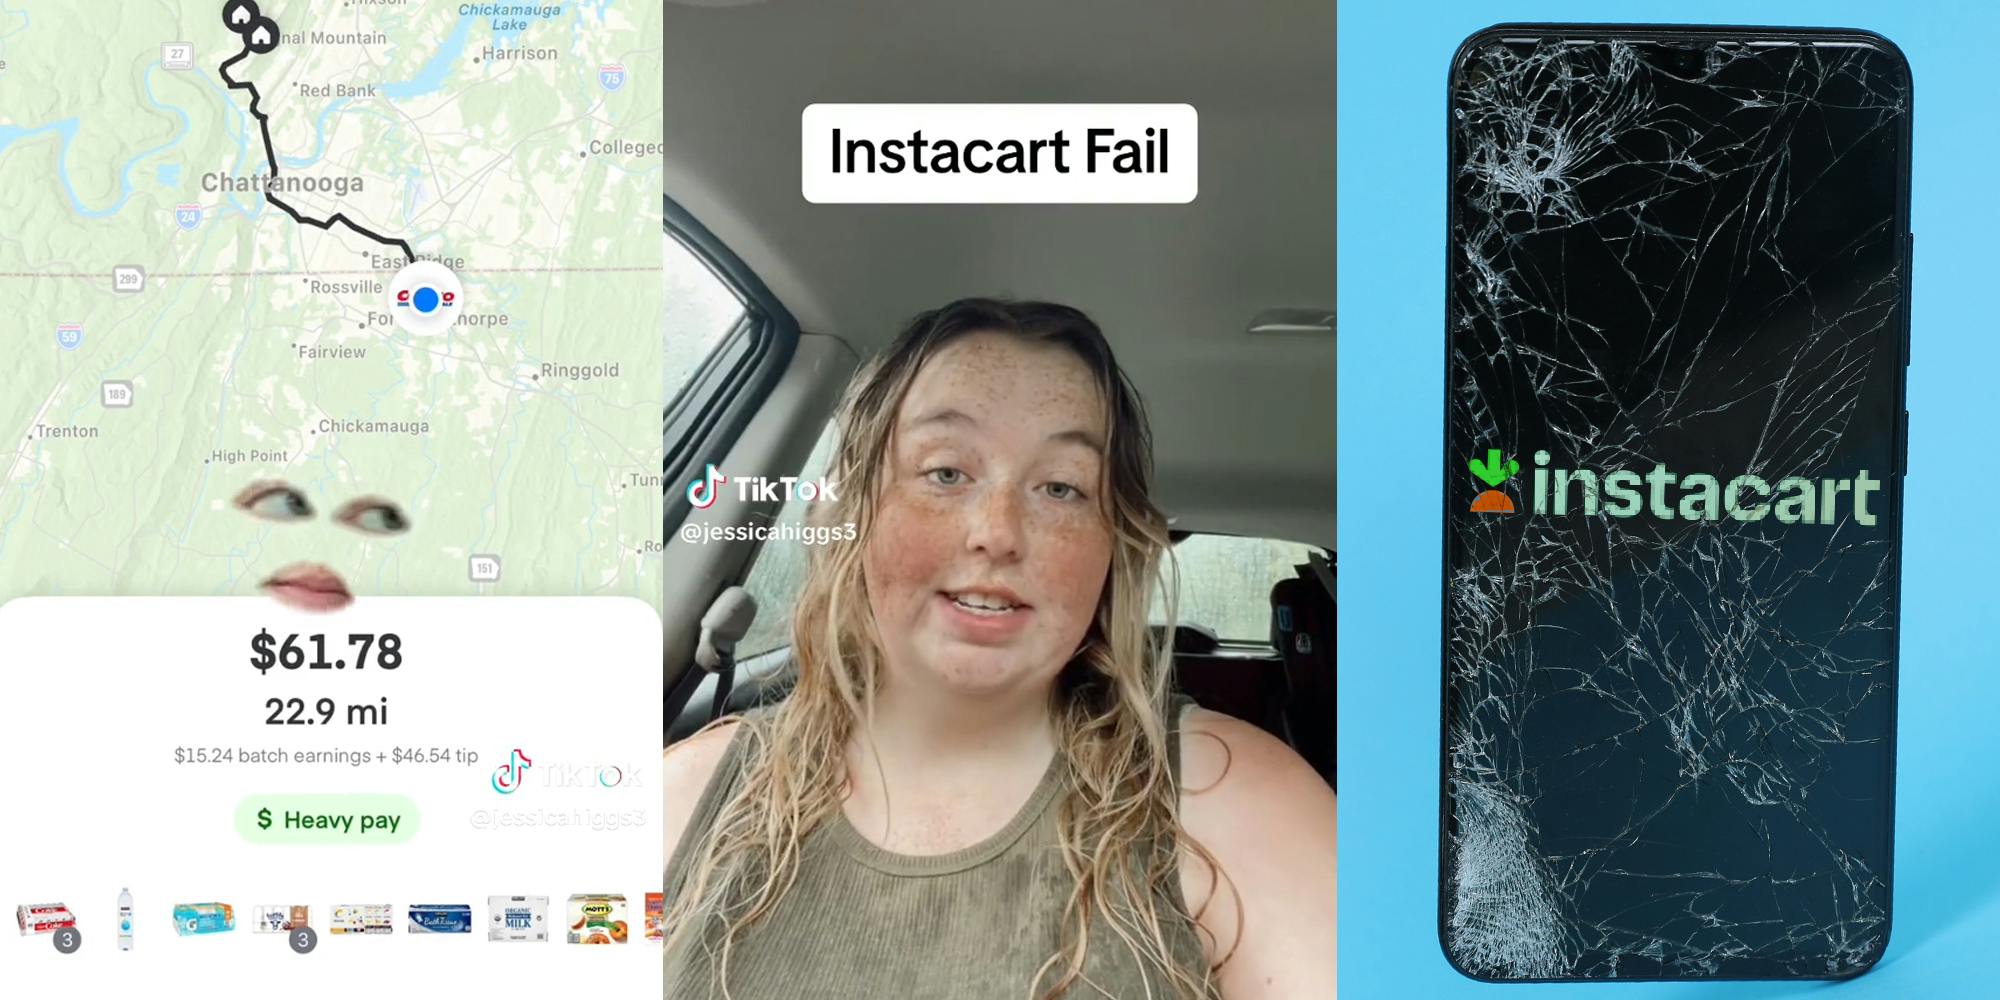 map (l) young woman in car with caption "instacart fail" (c) instacart logo on broken phone screen (r)